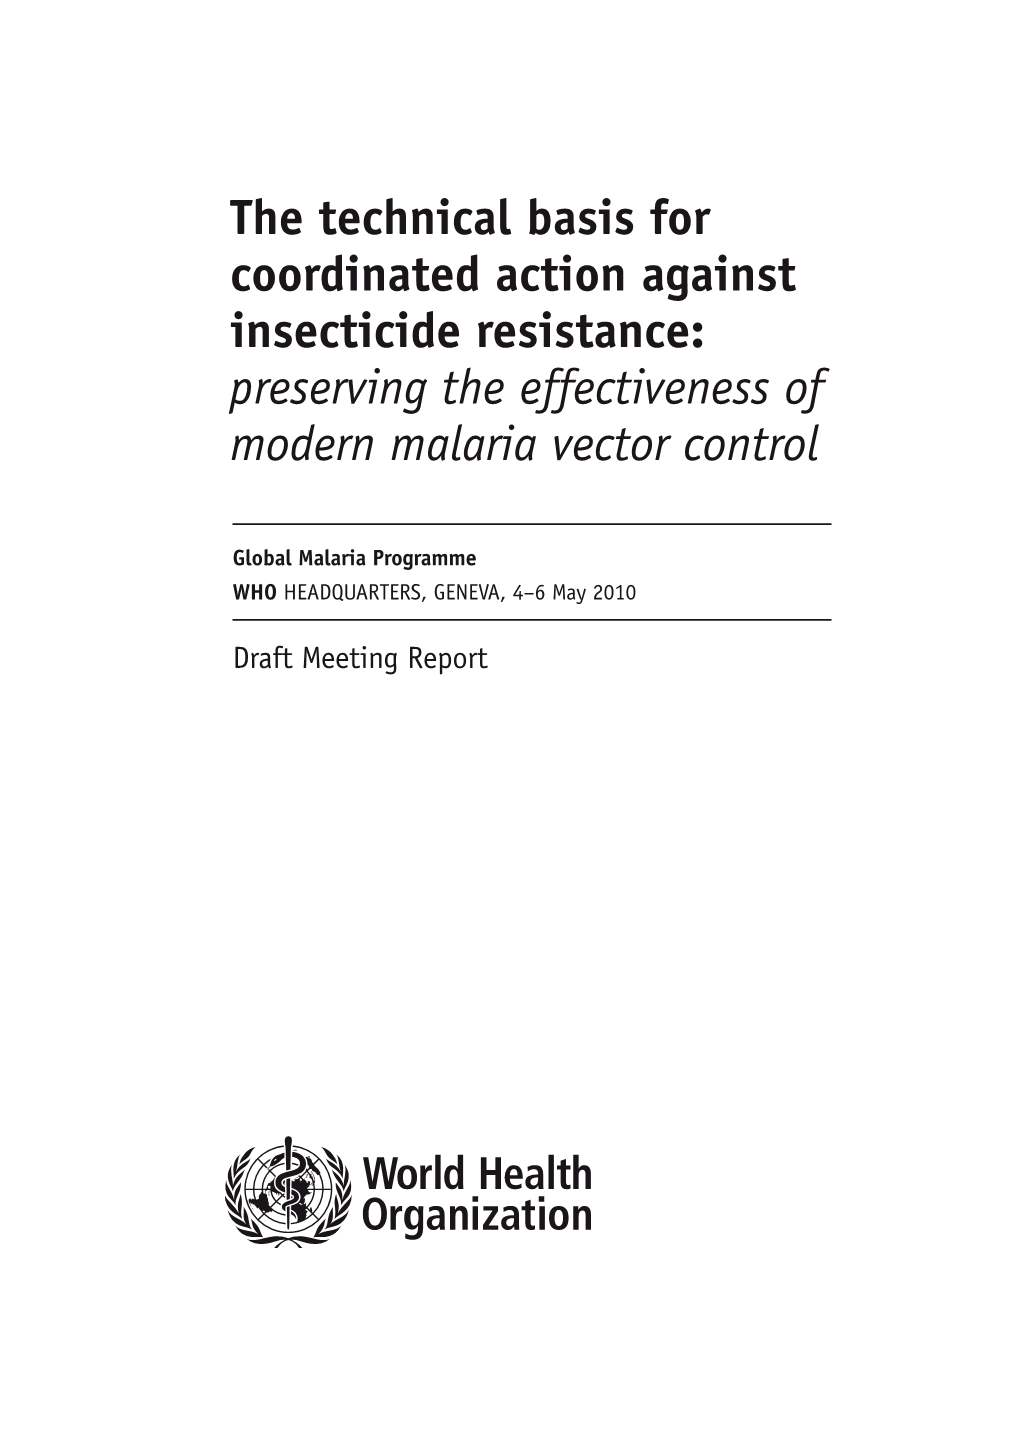 The Technical Basis for Coordinated Action Against Insecticide Resistance: Preserving the Effectiveness of Modern Malaria Vector Control